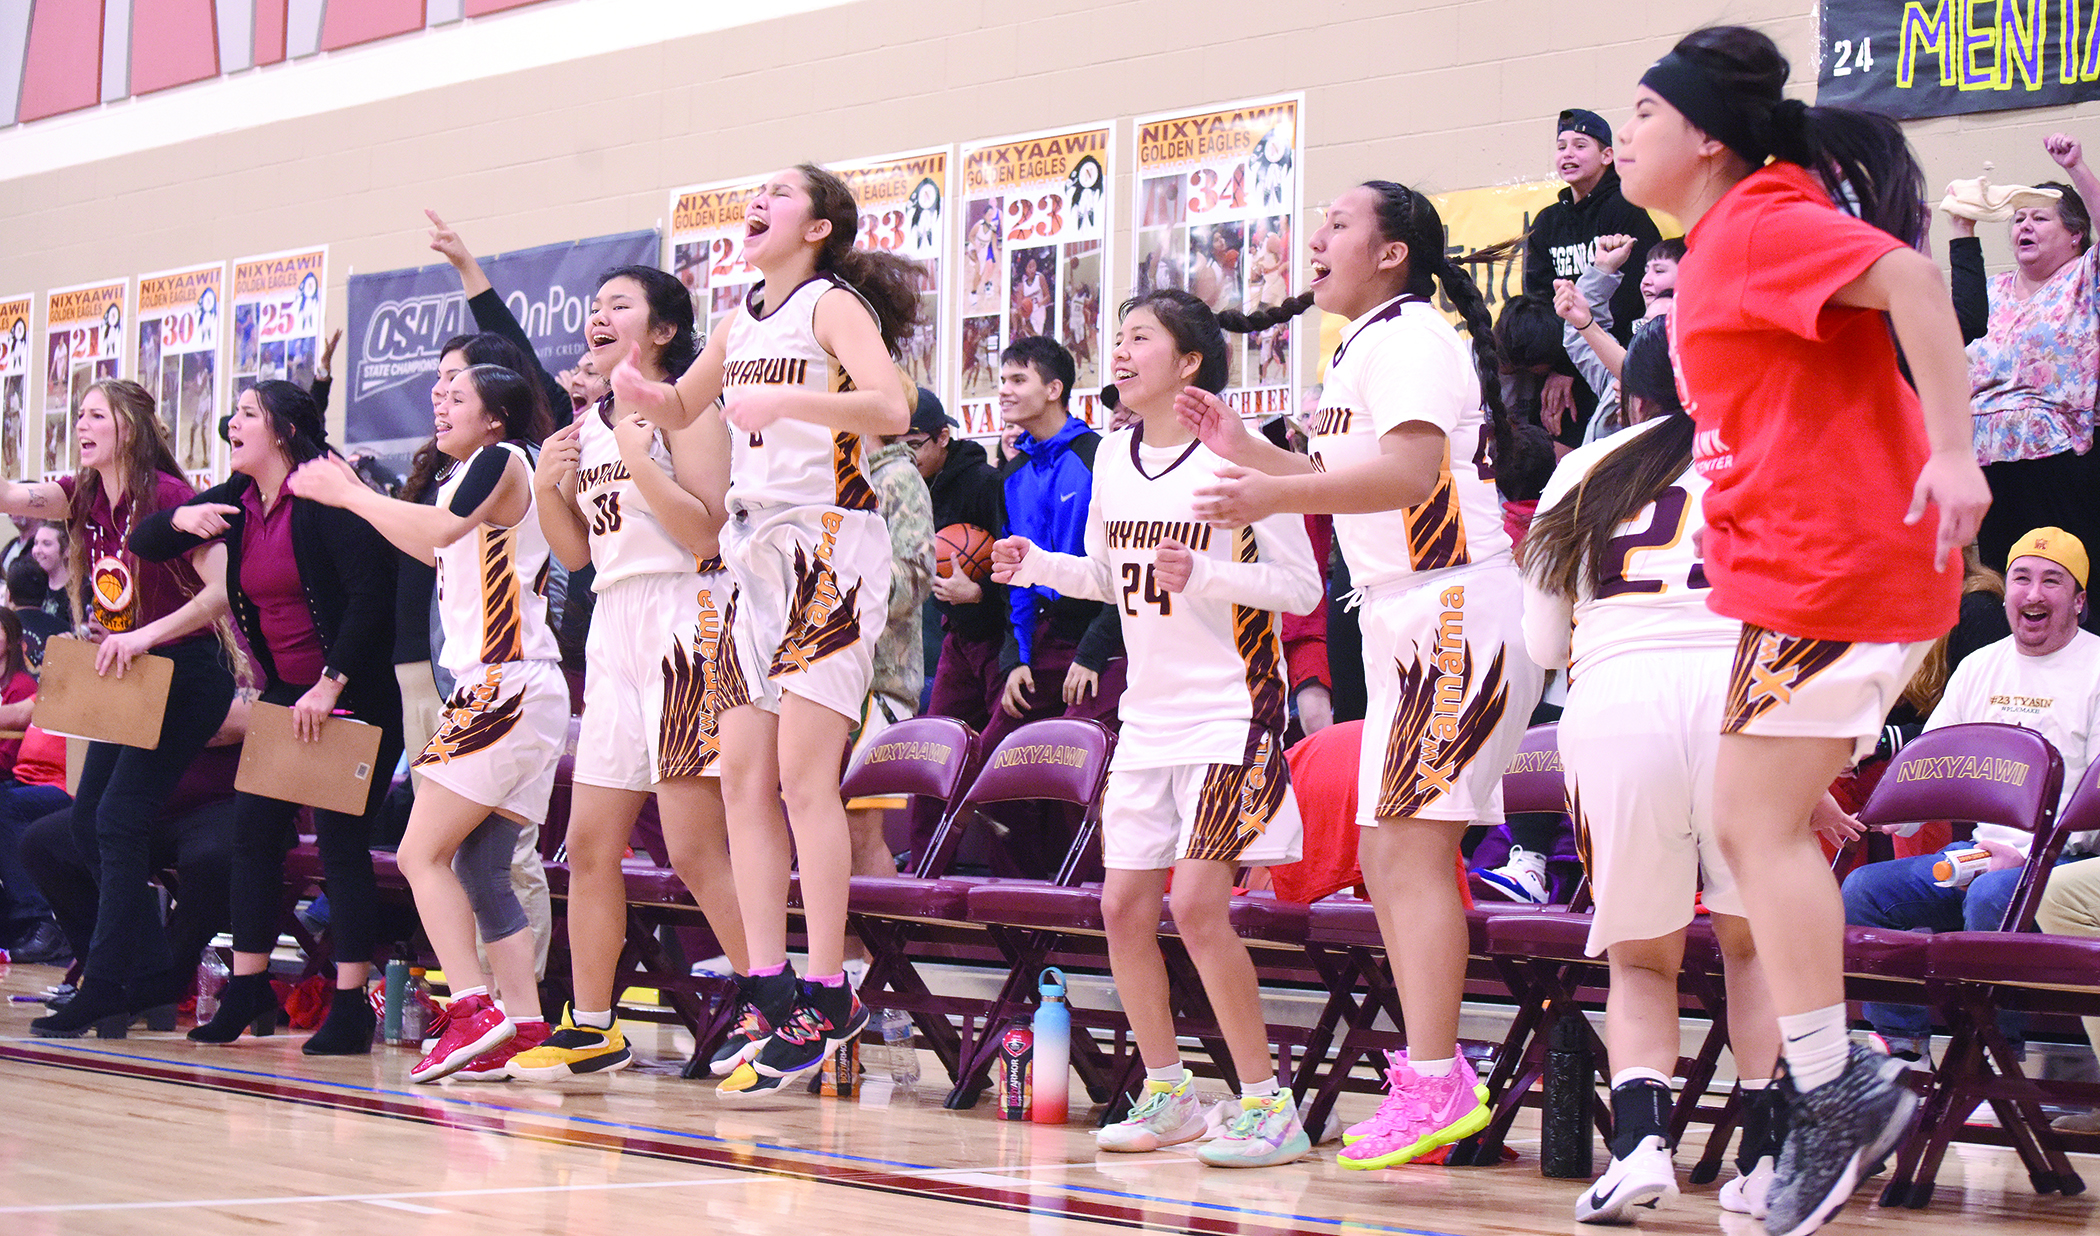 The bench was going crazy as the Nixyaawii girls mounted a comeback against Elgin in their next-to-last conference game. From left, the coaches and players included Coach Kaitlynn Melton, Coach Taryn Doiminguez, Ally Maddern (hidden), Ivory Herrera, Christina Kaltsukis, Adilia Hart, Mackenzie Kiona, Susie Patrick, Chelsea Farrow (back to camera), and Celia Farrow.